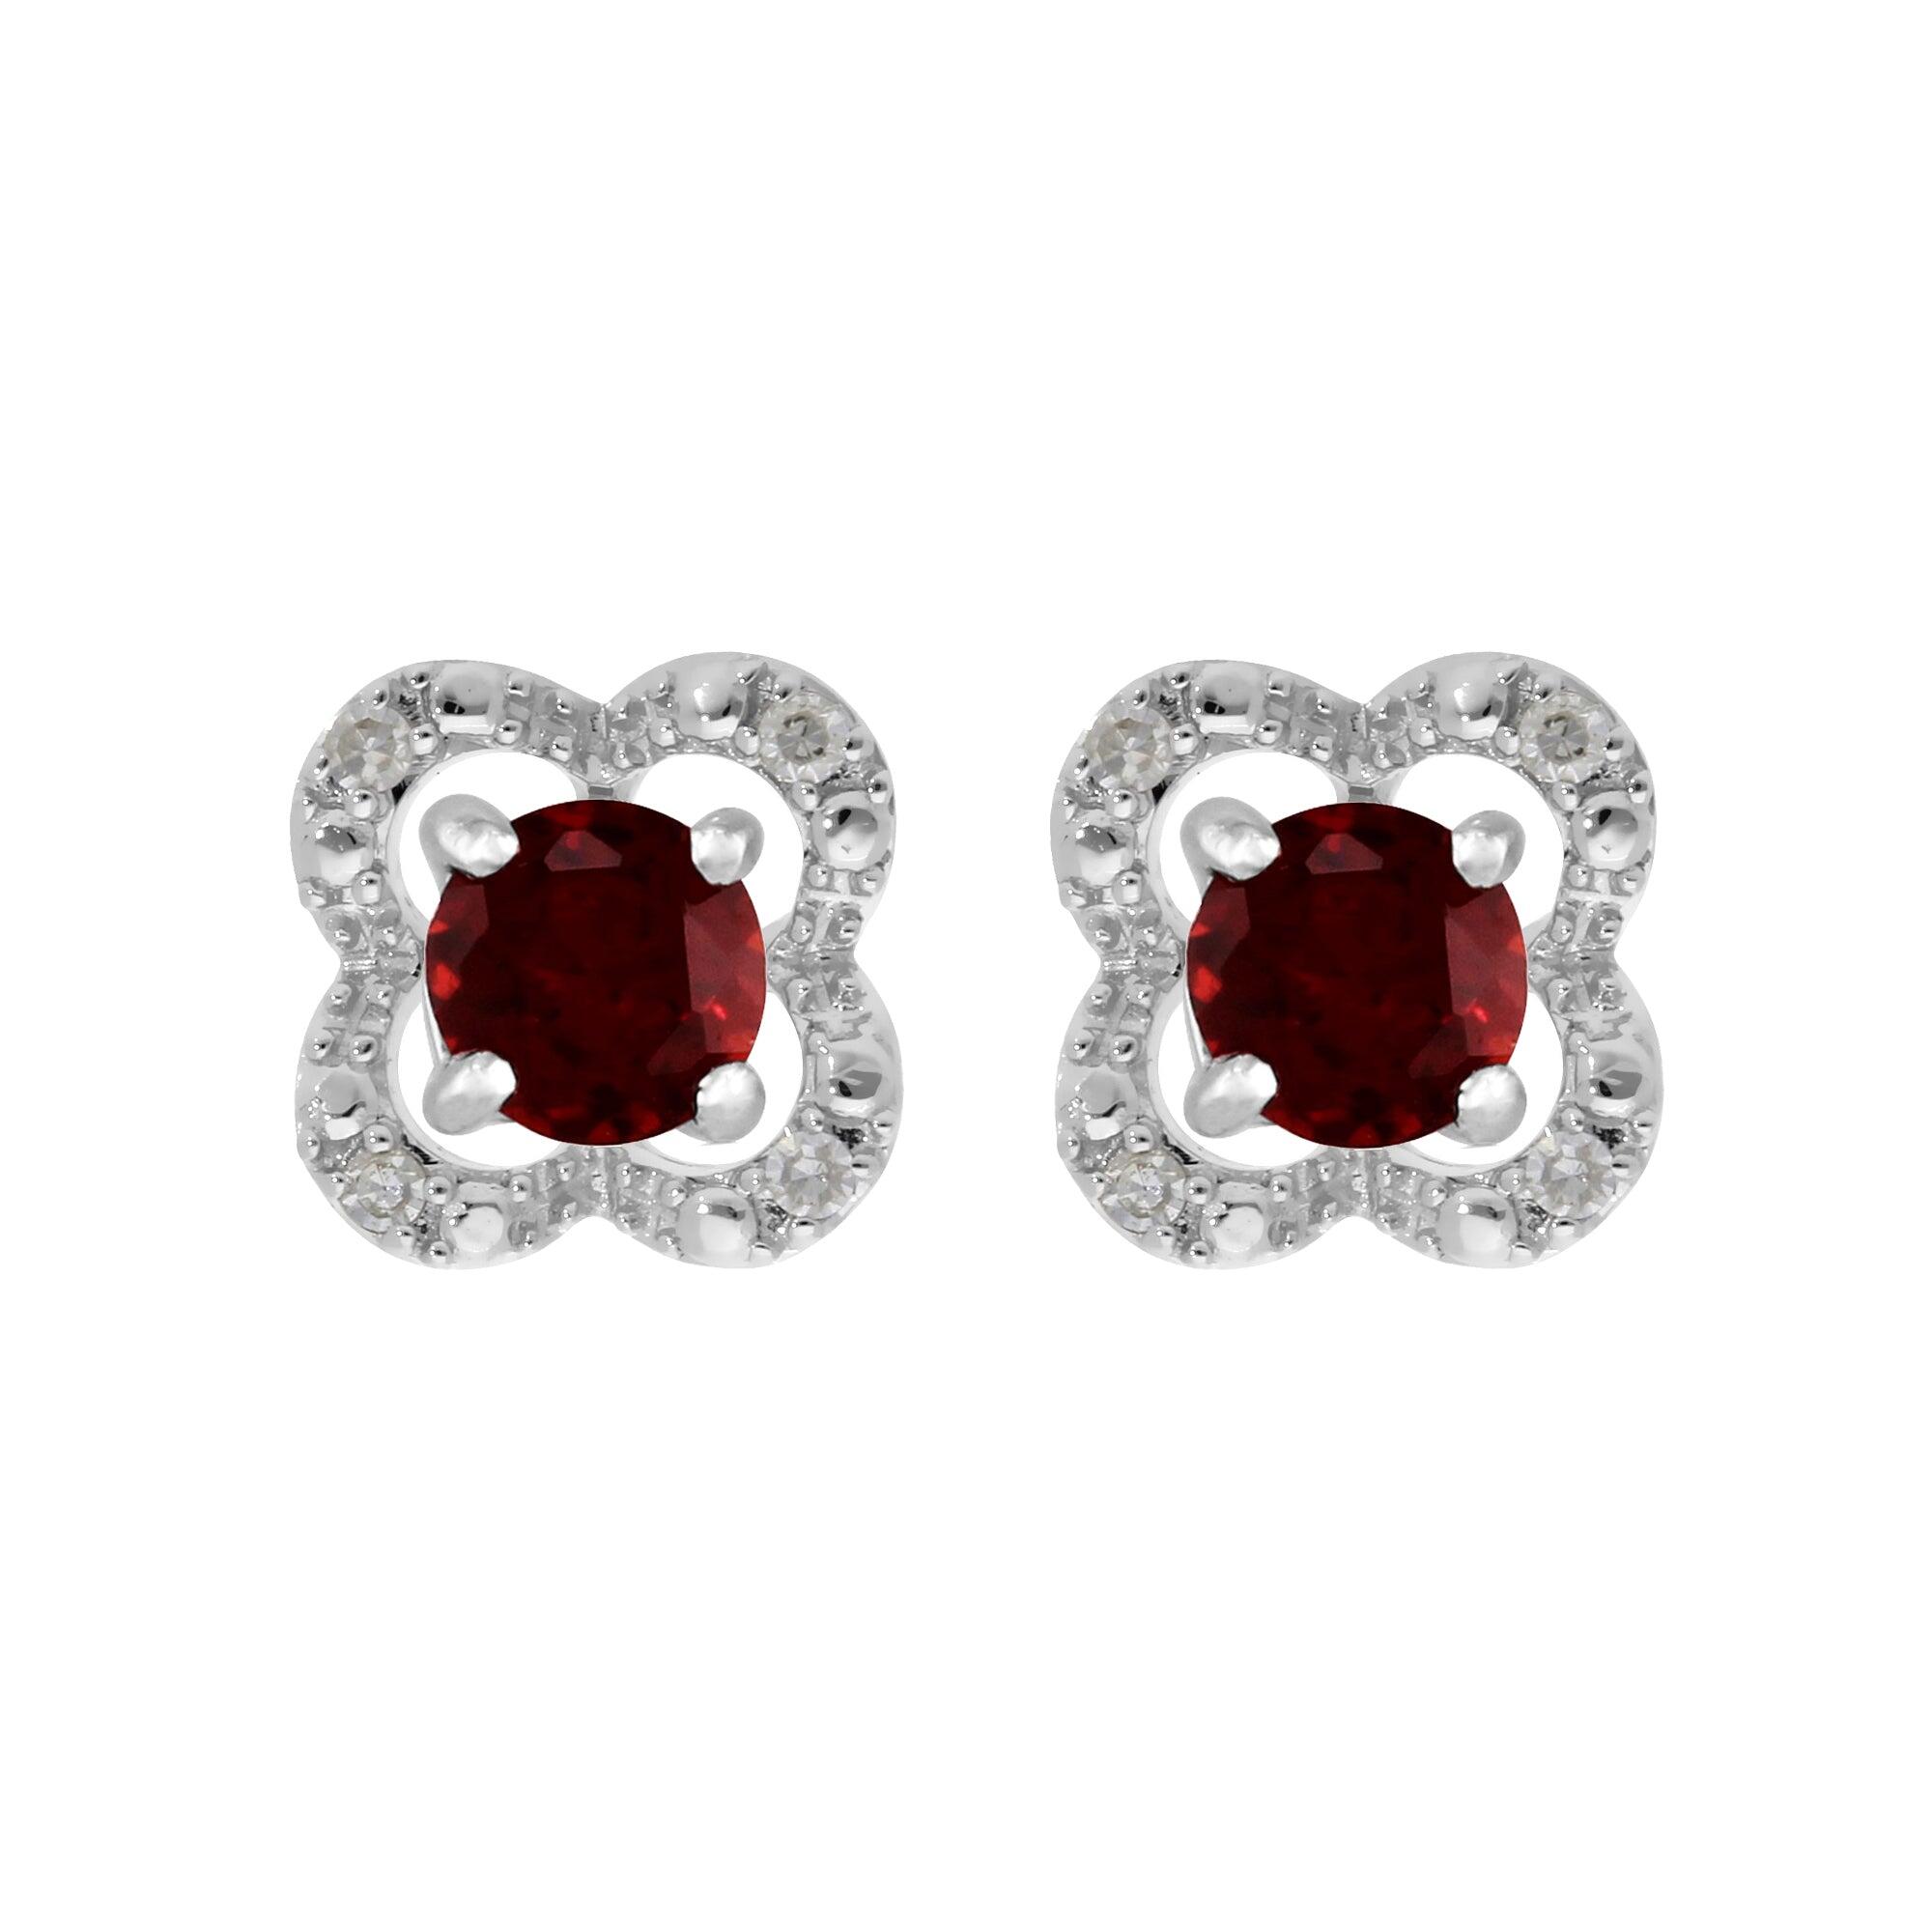 Classic Round Garnet Studs with Detachable Diamond Flower Ear Jacket in 9ct White Gold